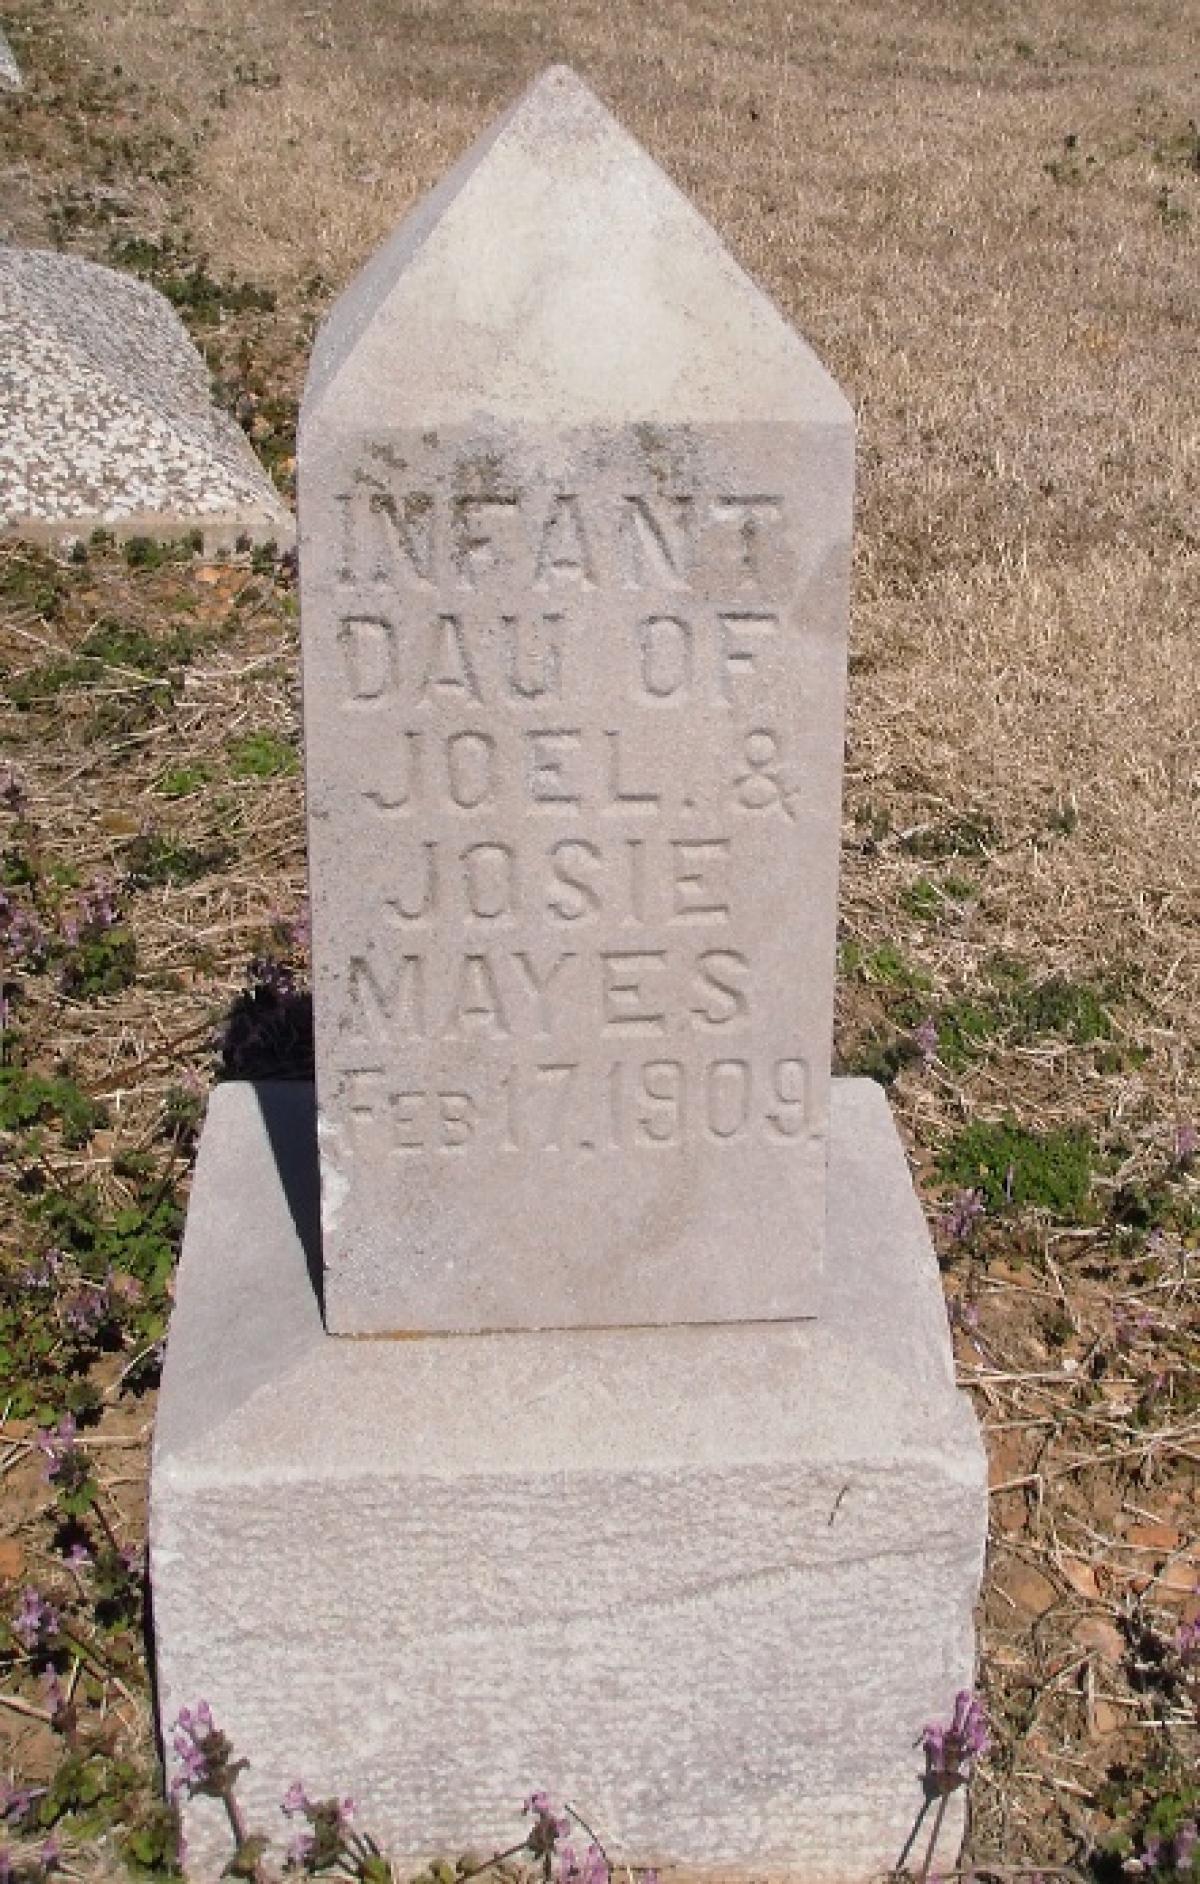 OK, Grove, Olympus Cemetery, Headstone, Mayes, Infant Daughter